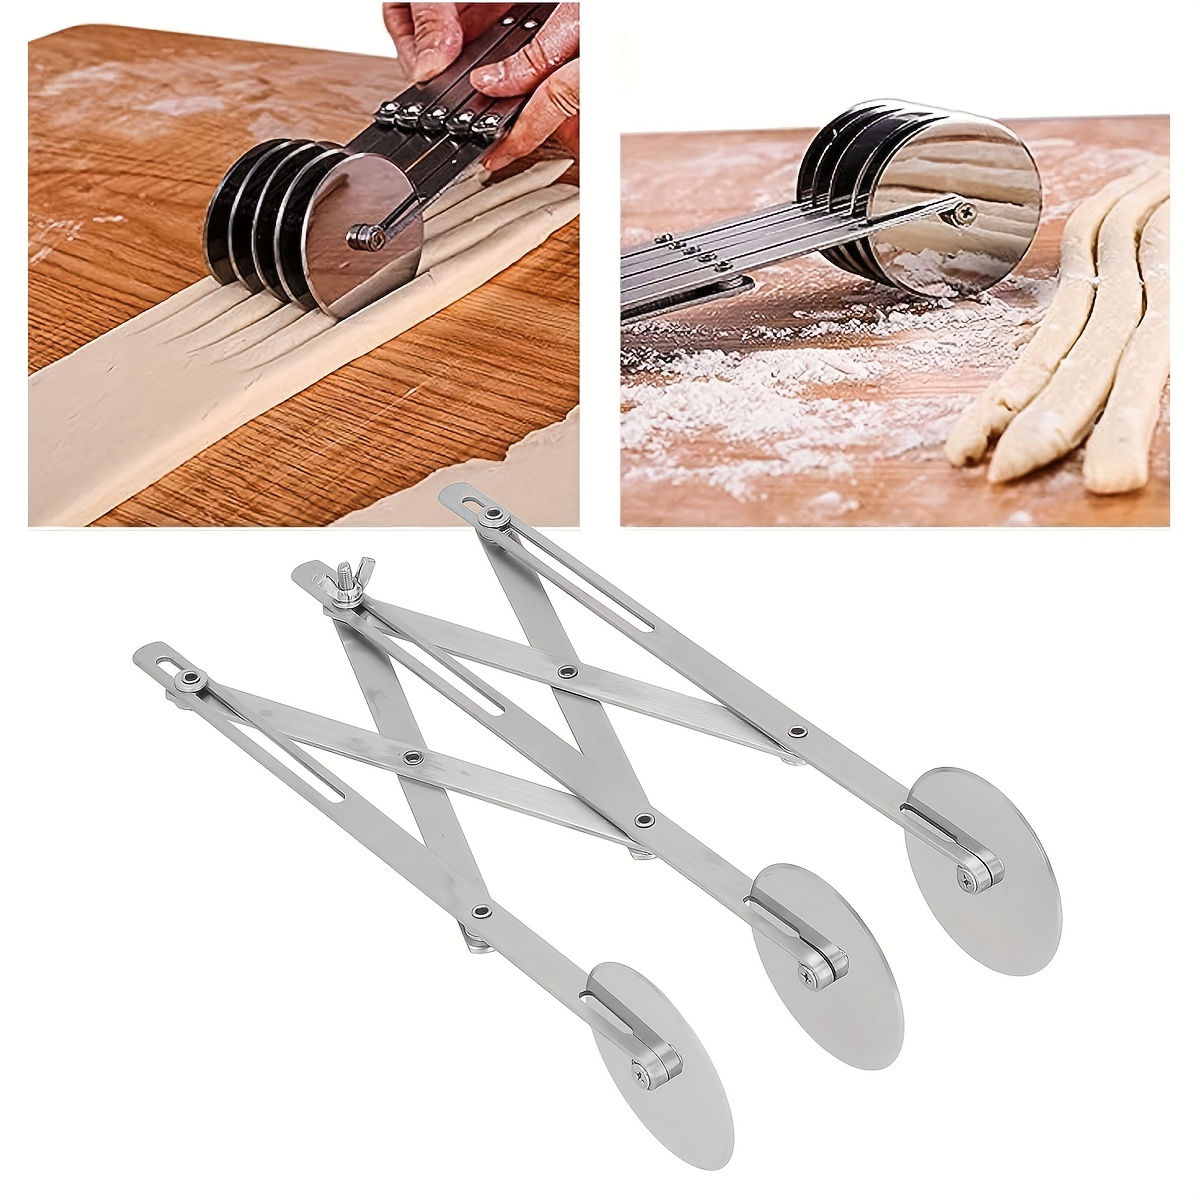 Adjustable Pastry Cutter, 5 Wheel Stainless Steel Dough Divider